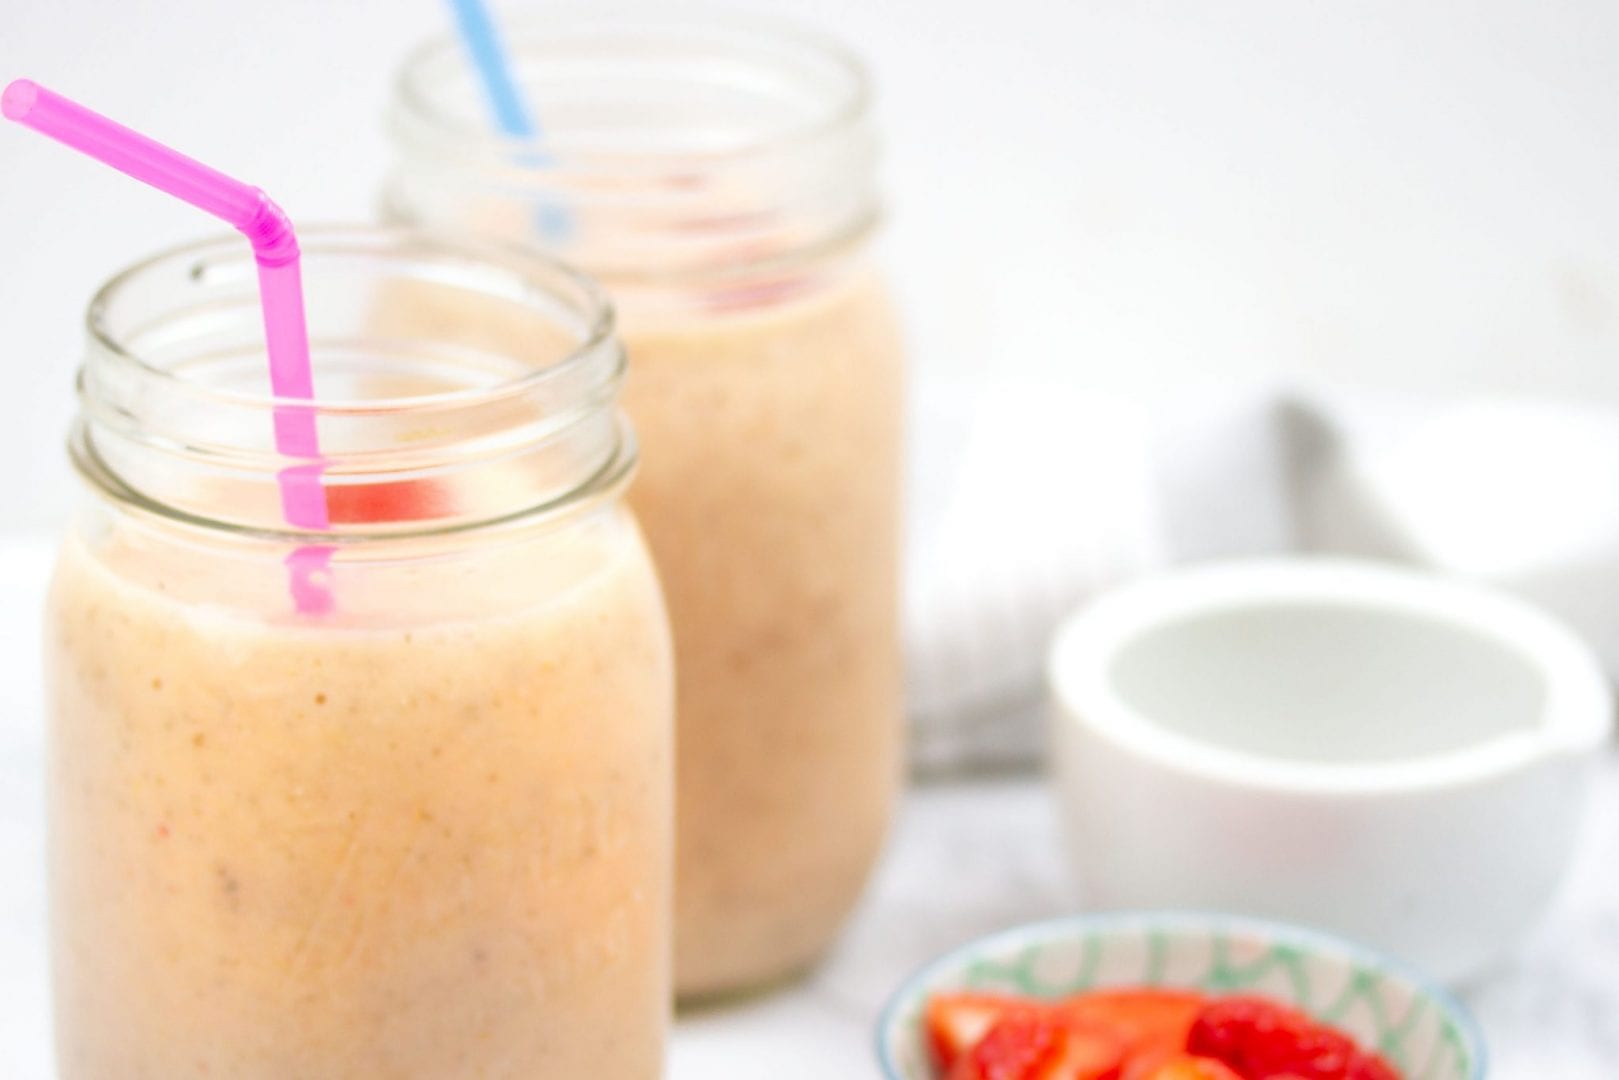 banana smoothies - kids smoothies - baby first foods - mango coconut and banana smoothies